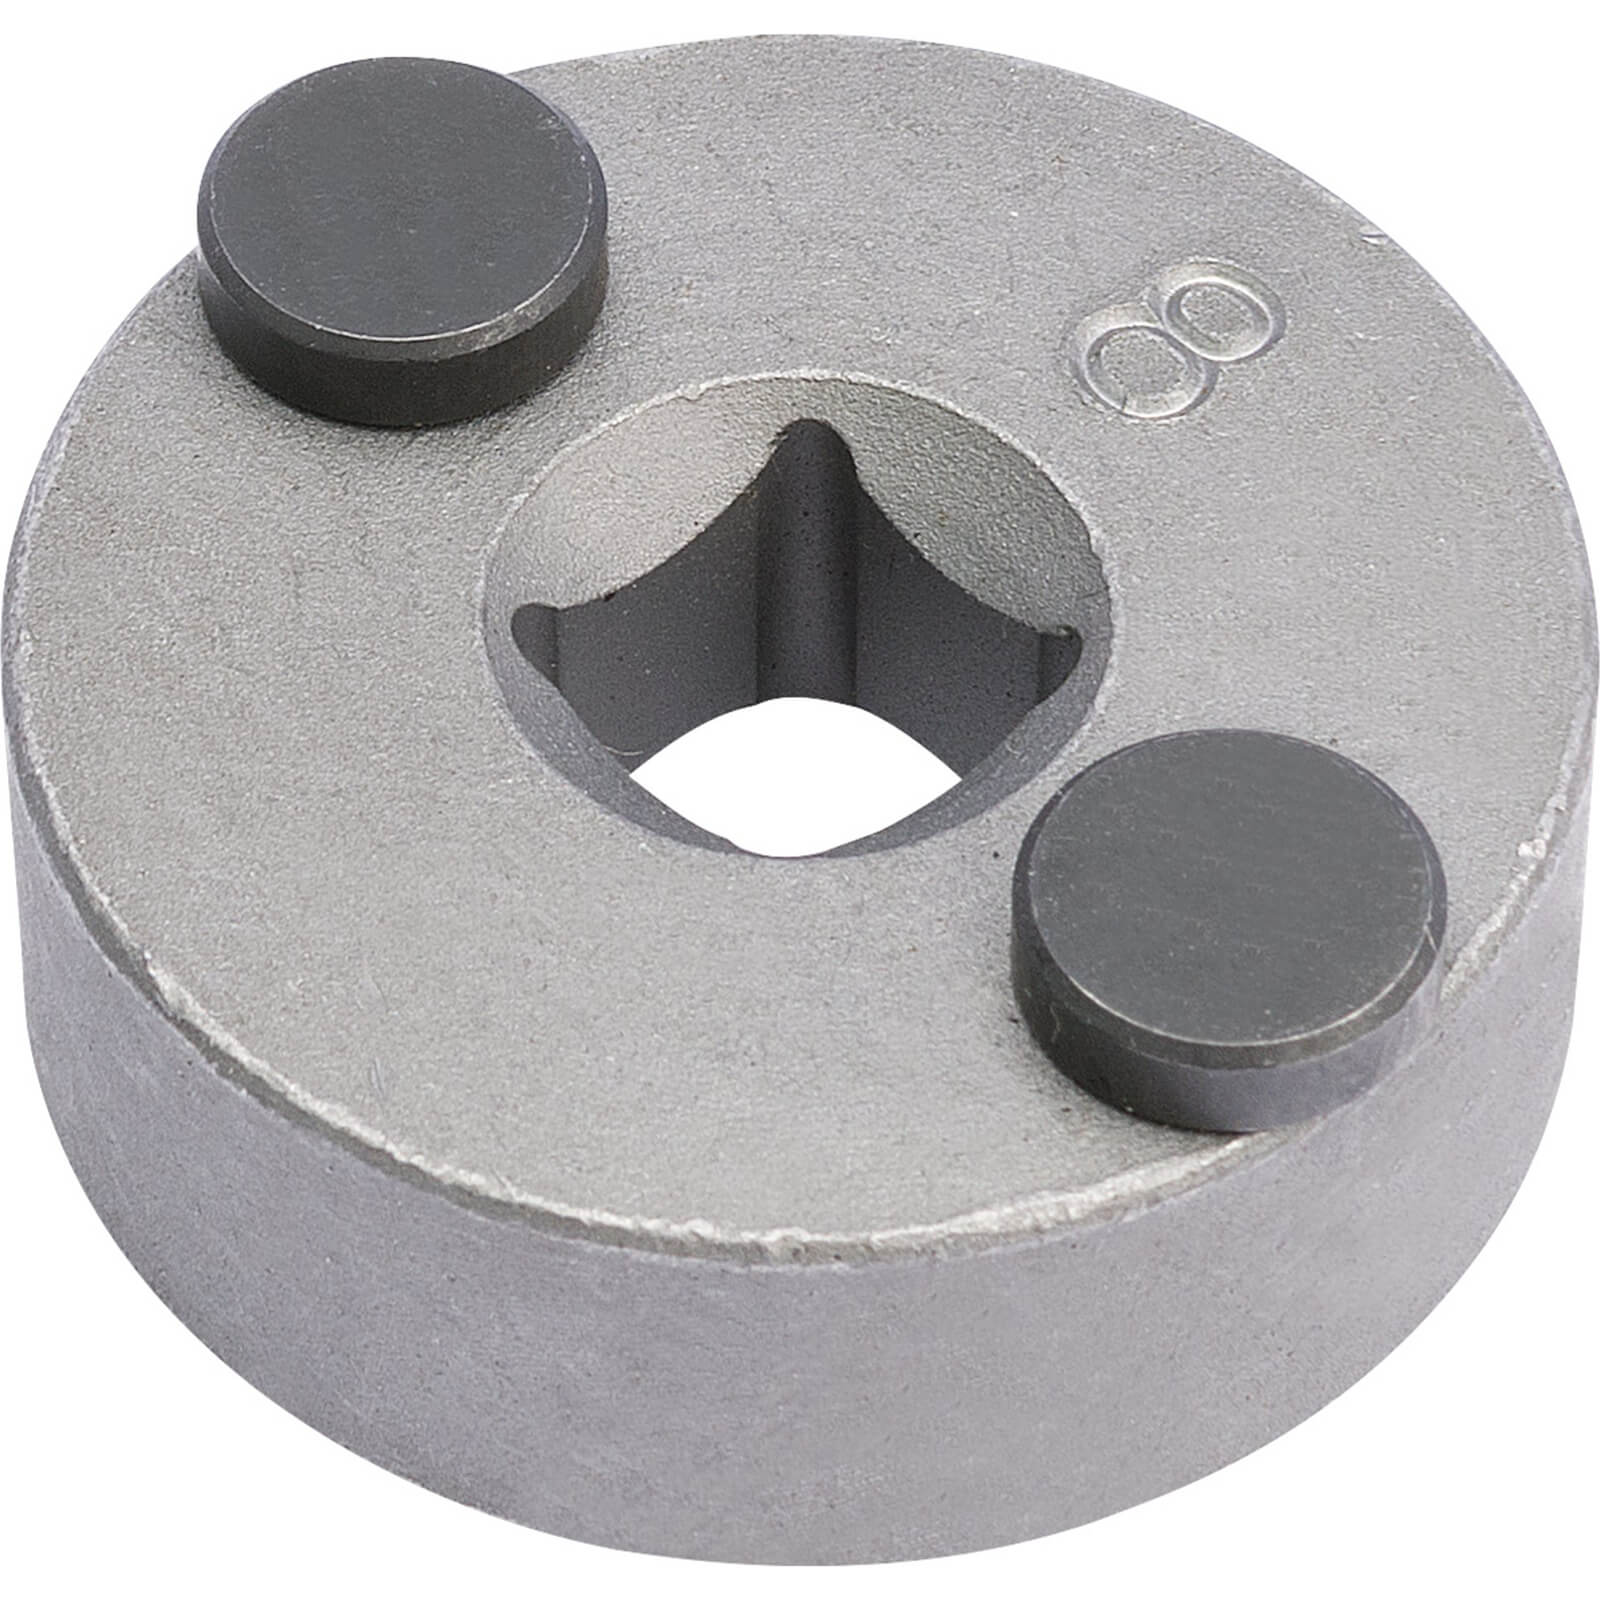 Image of Draper Expert 3/8" Drive Brake Piston Wind Back Tool for Ford and Subaru Vehicles 3/8"